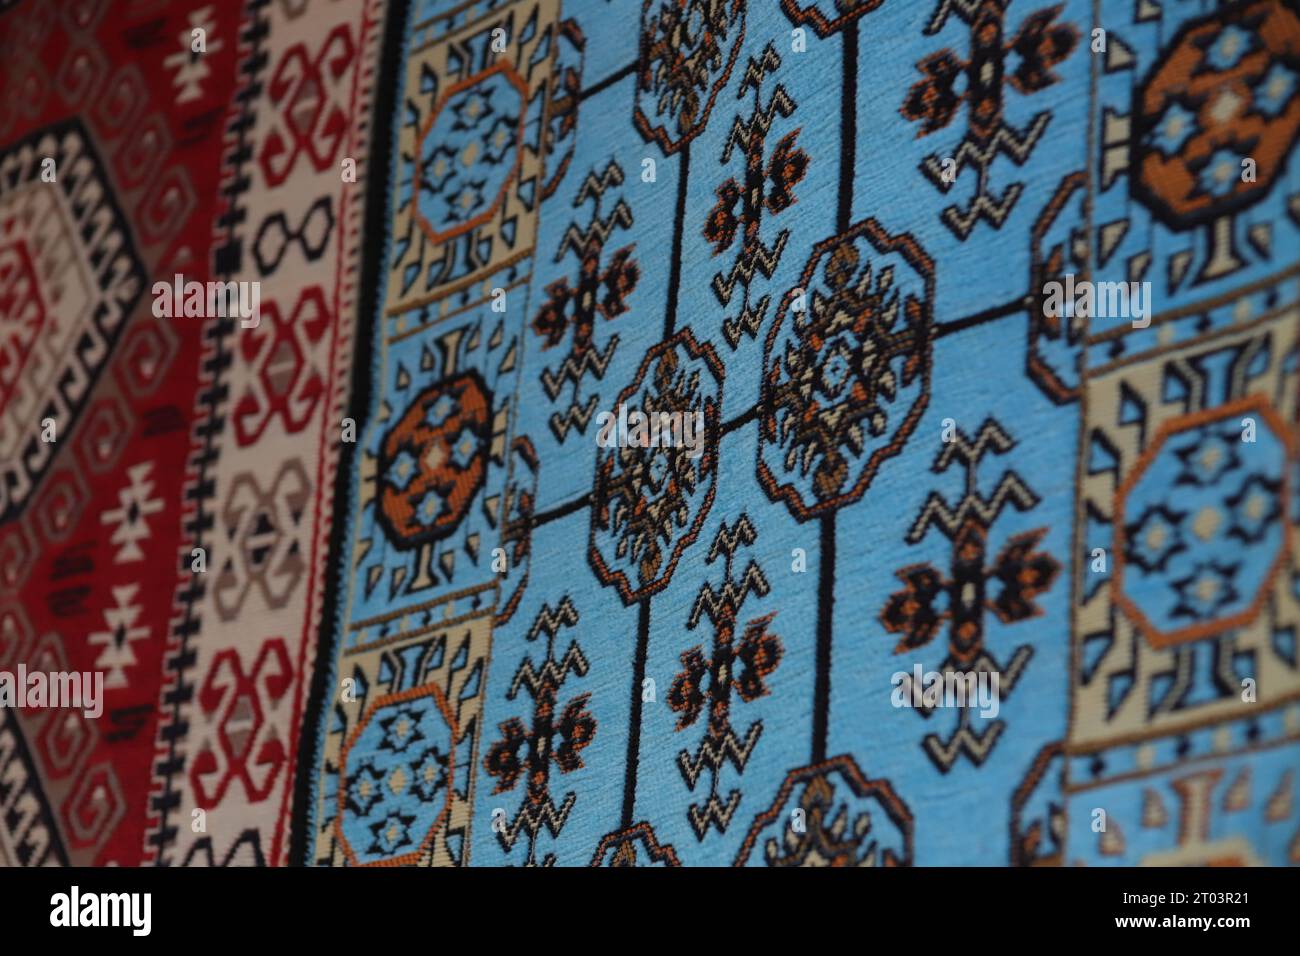 Two Beautiful, ethnic patterned Woven Rugs, one Blue and one Red, hang on a Wall being displayed in the Streets of Gjirokaster Baazar in Albania. Stock Photo